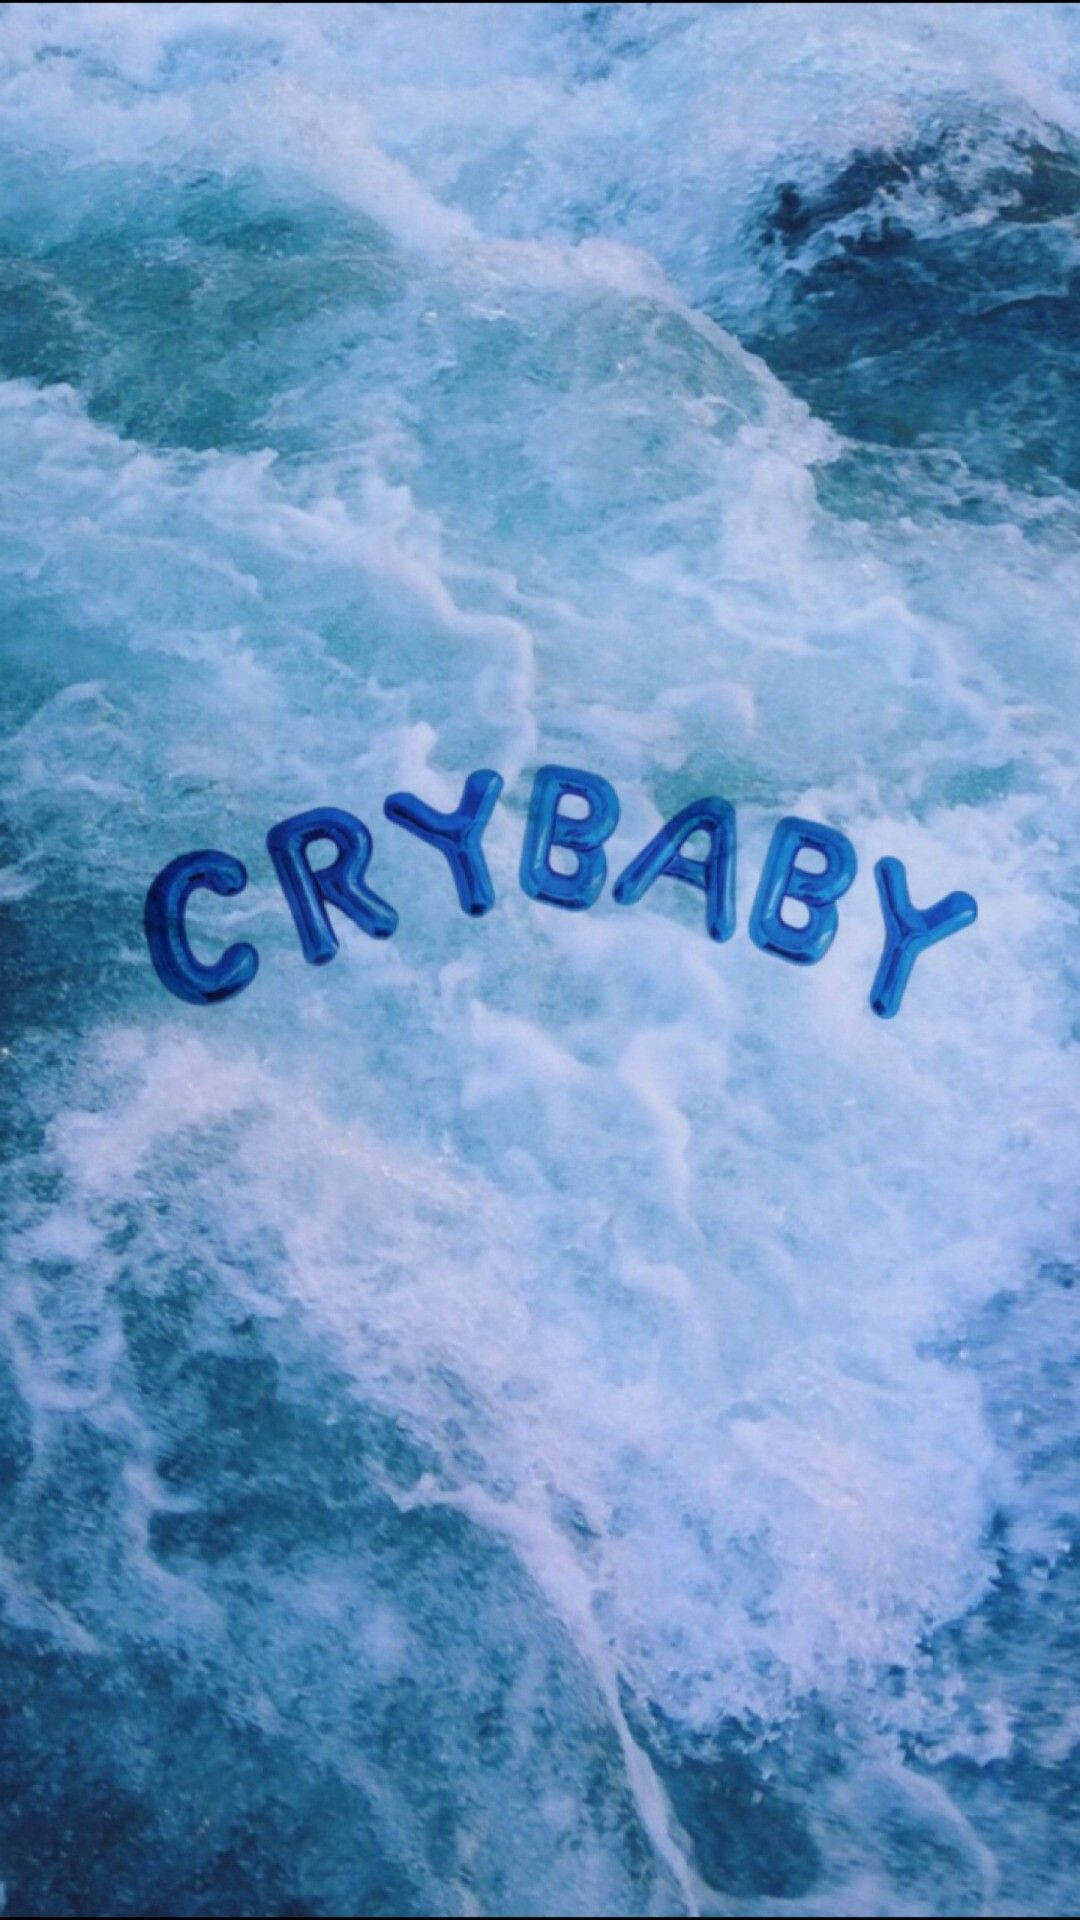 Crybaby - Cd Cover Art Wallpaper